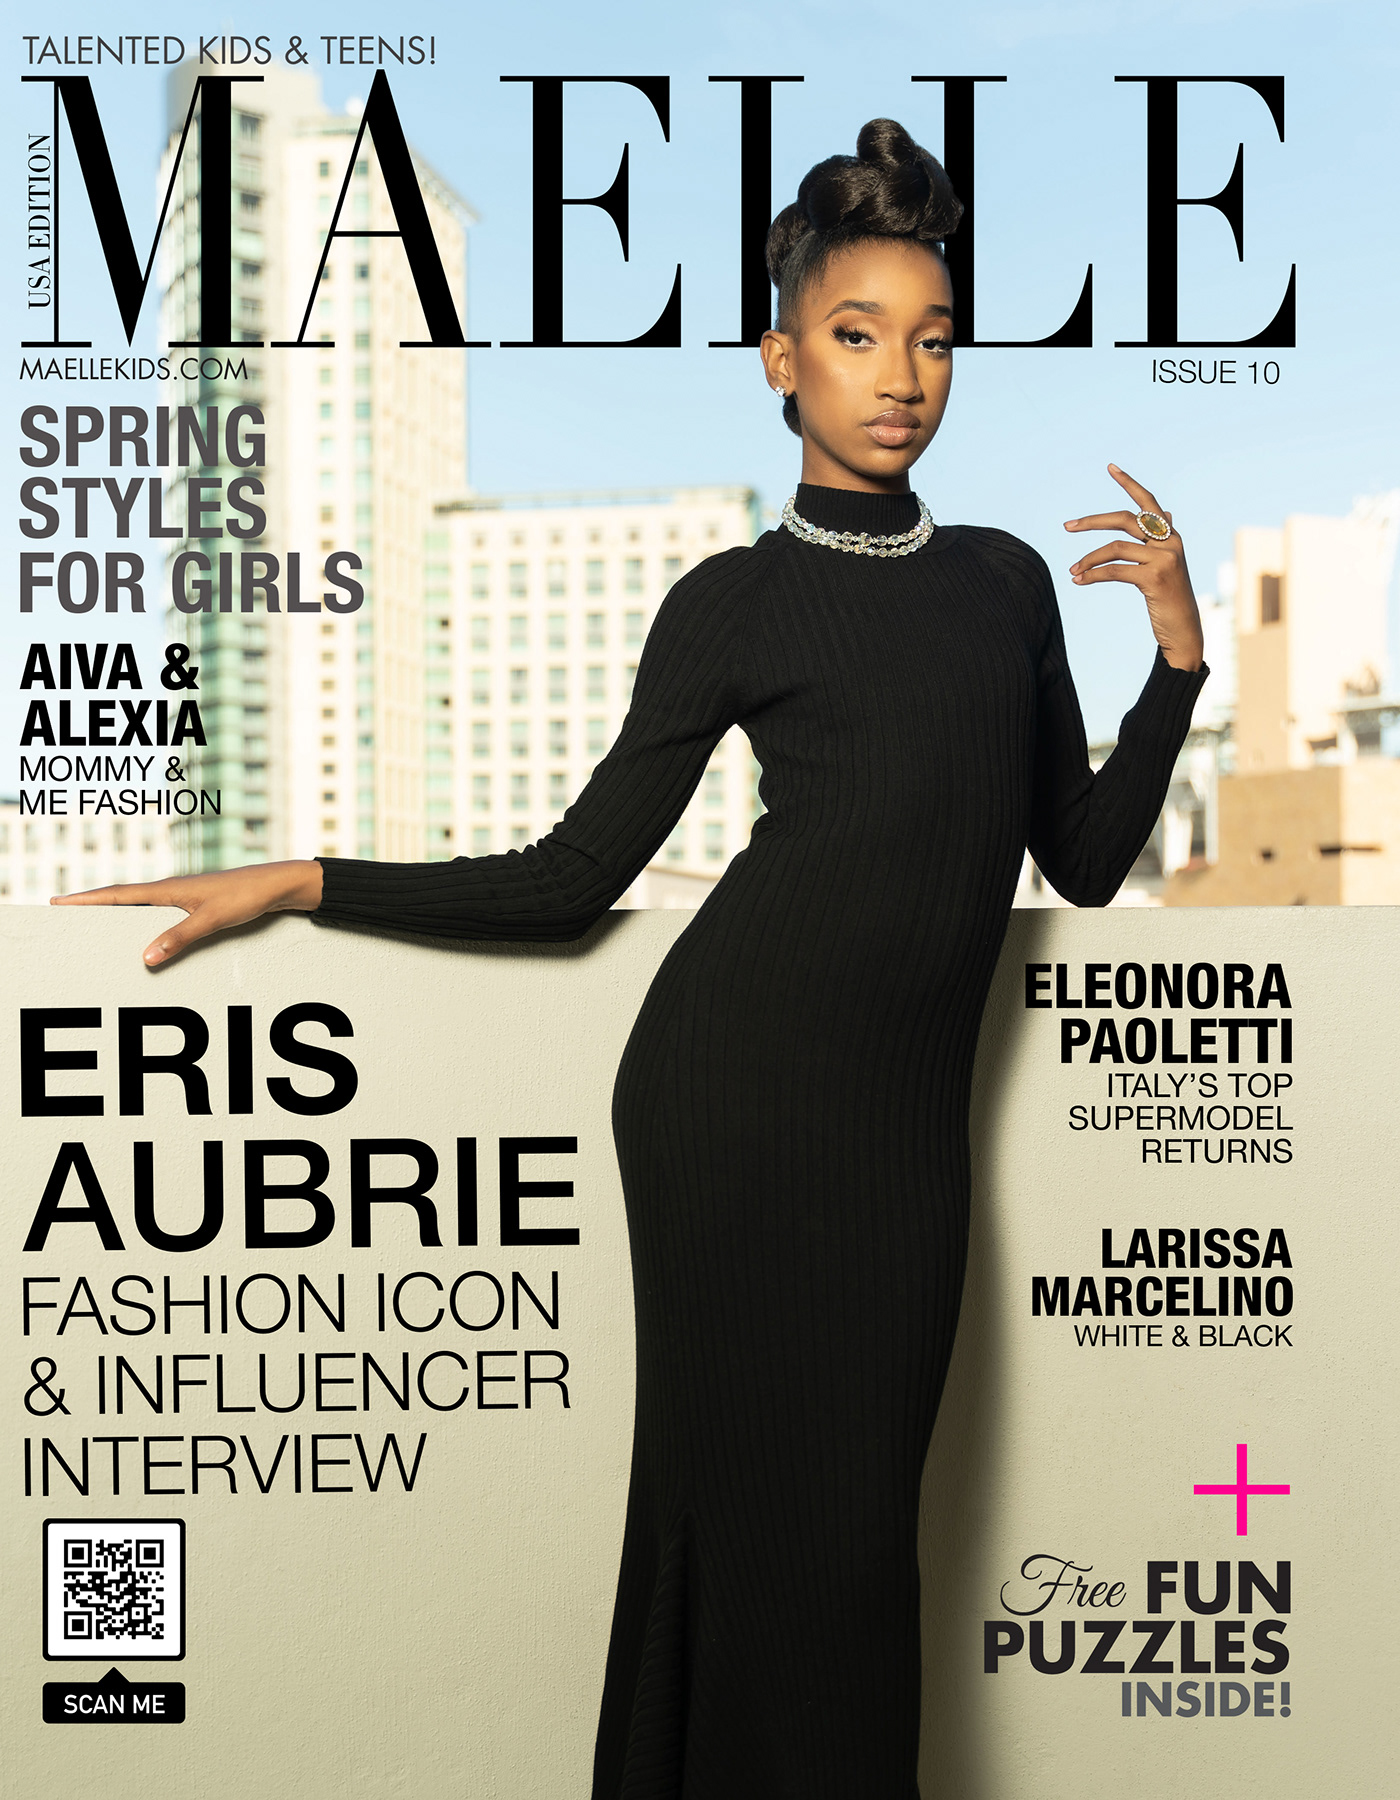 Maelle Ink Magazine Issue 10 Cover